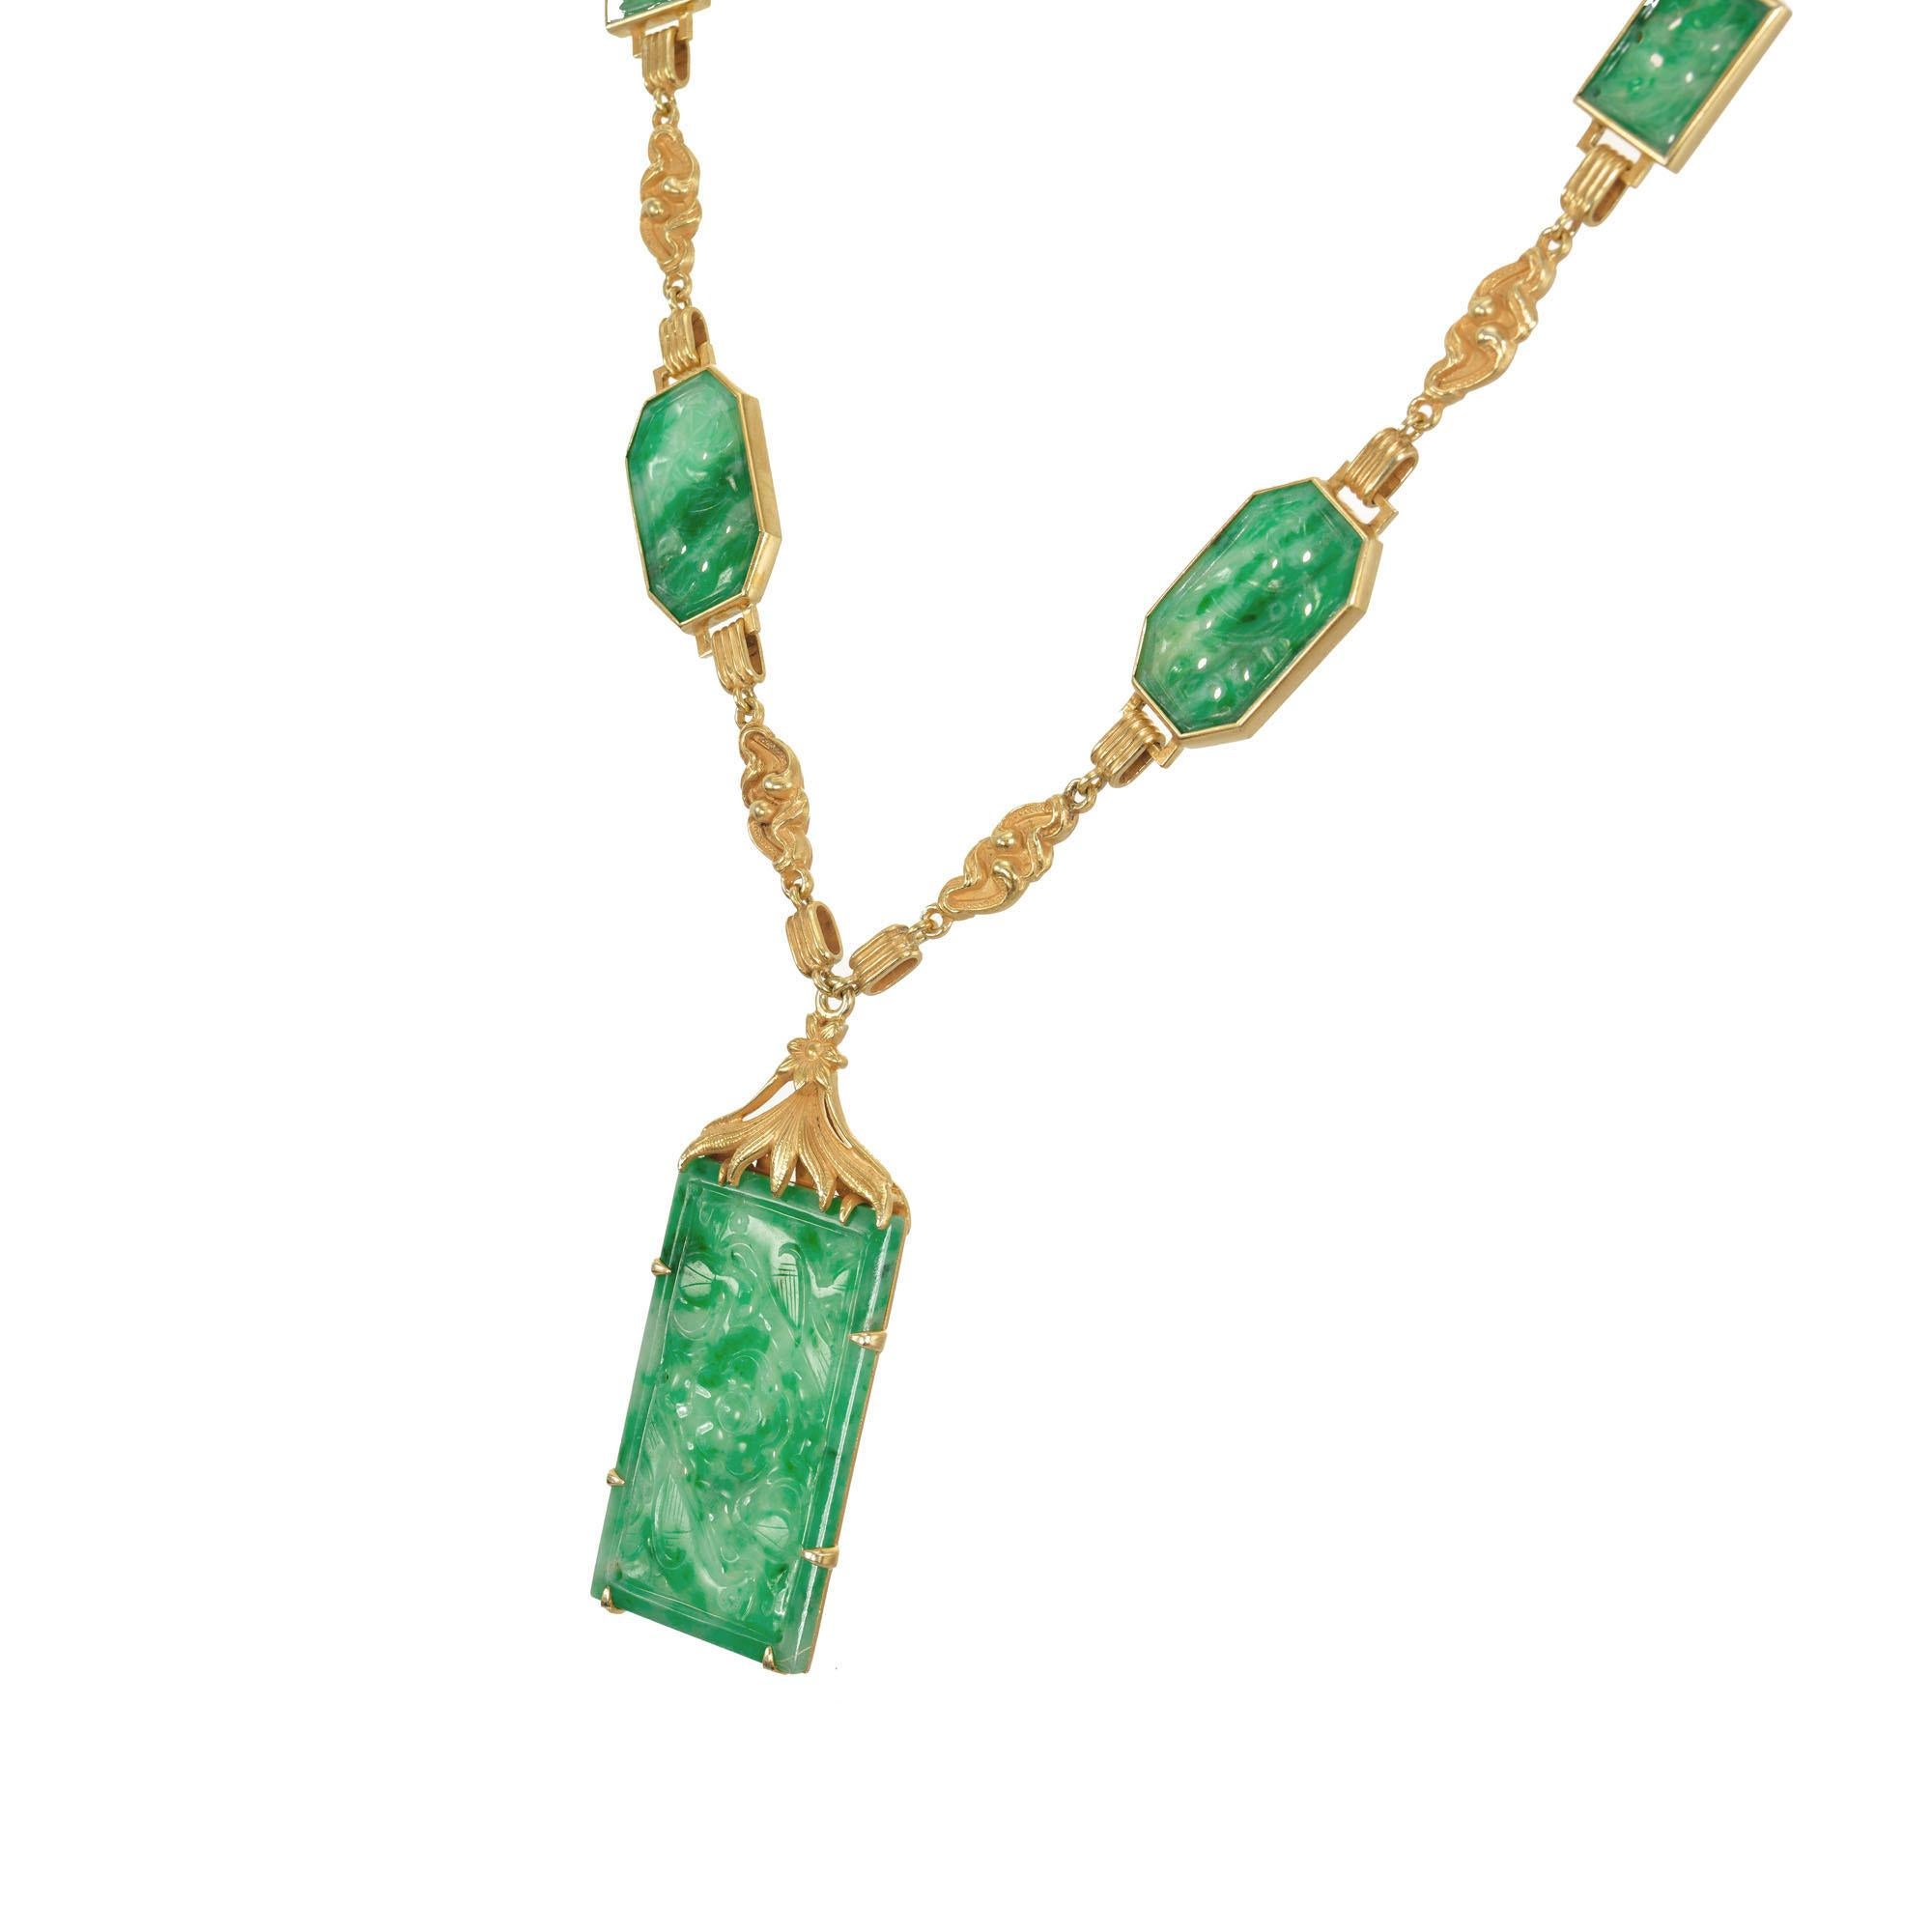 Authentic 1900 Art Nouveau 14k yellow gold natural untreated Jadeite Jade carved tablet necklace. 16 inches long. 

8 rectangular pierced carved green jadeite jade tablet, GIA Certificate # 1182255328
14k yellow gold 
Stamped: 14k
Hallmark: R
33.6